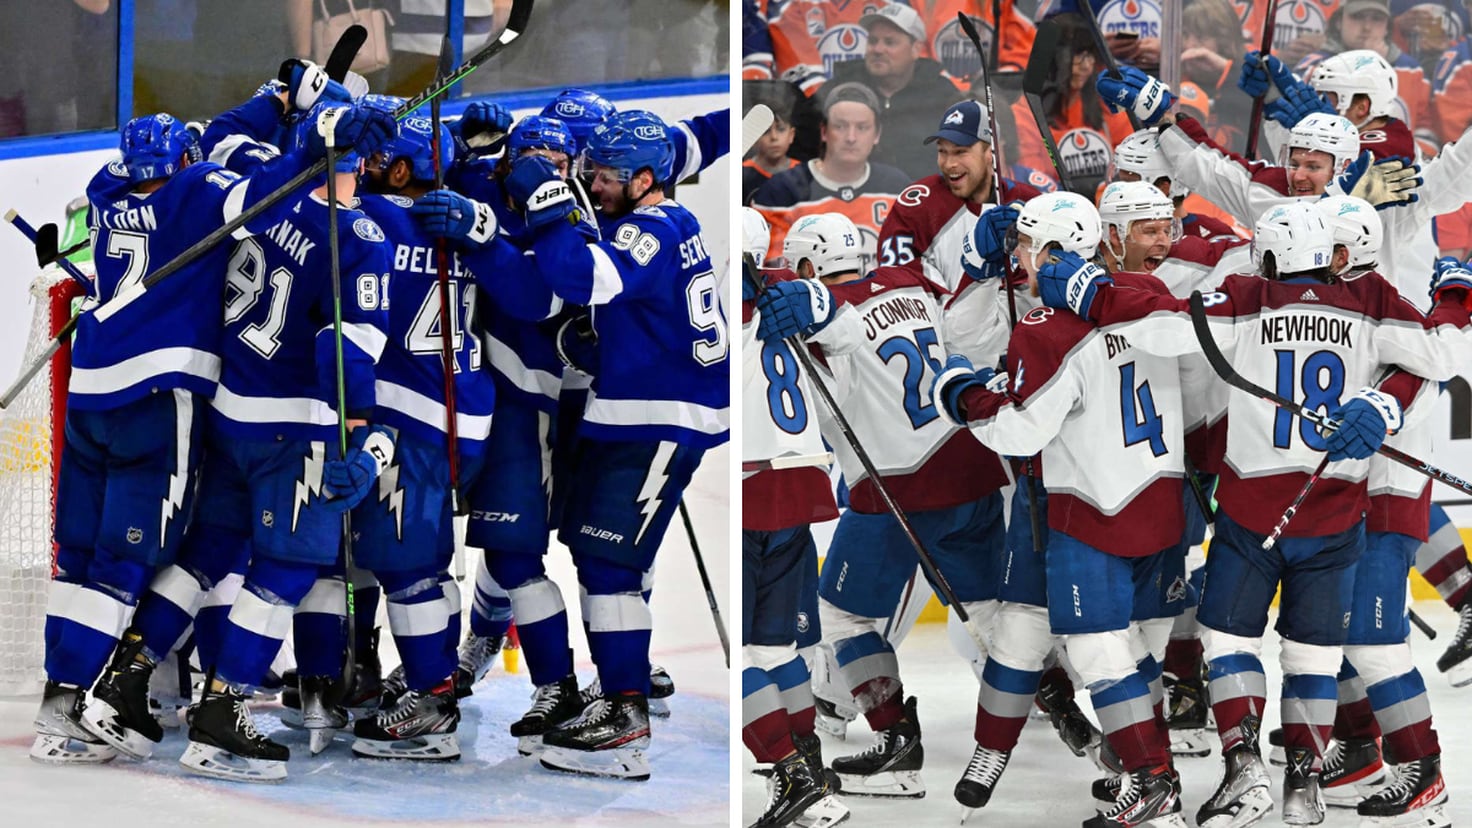 Avalanche vs Lightning full schedule when and where are the 2022 NHL